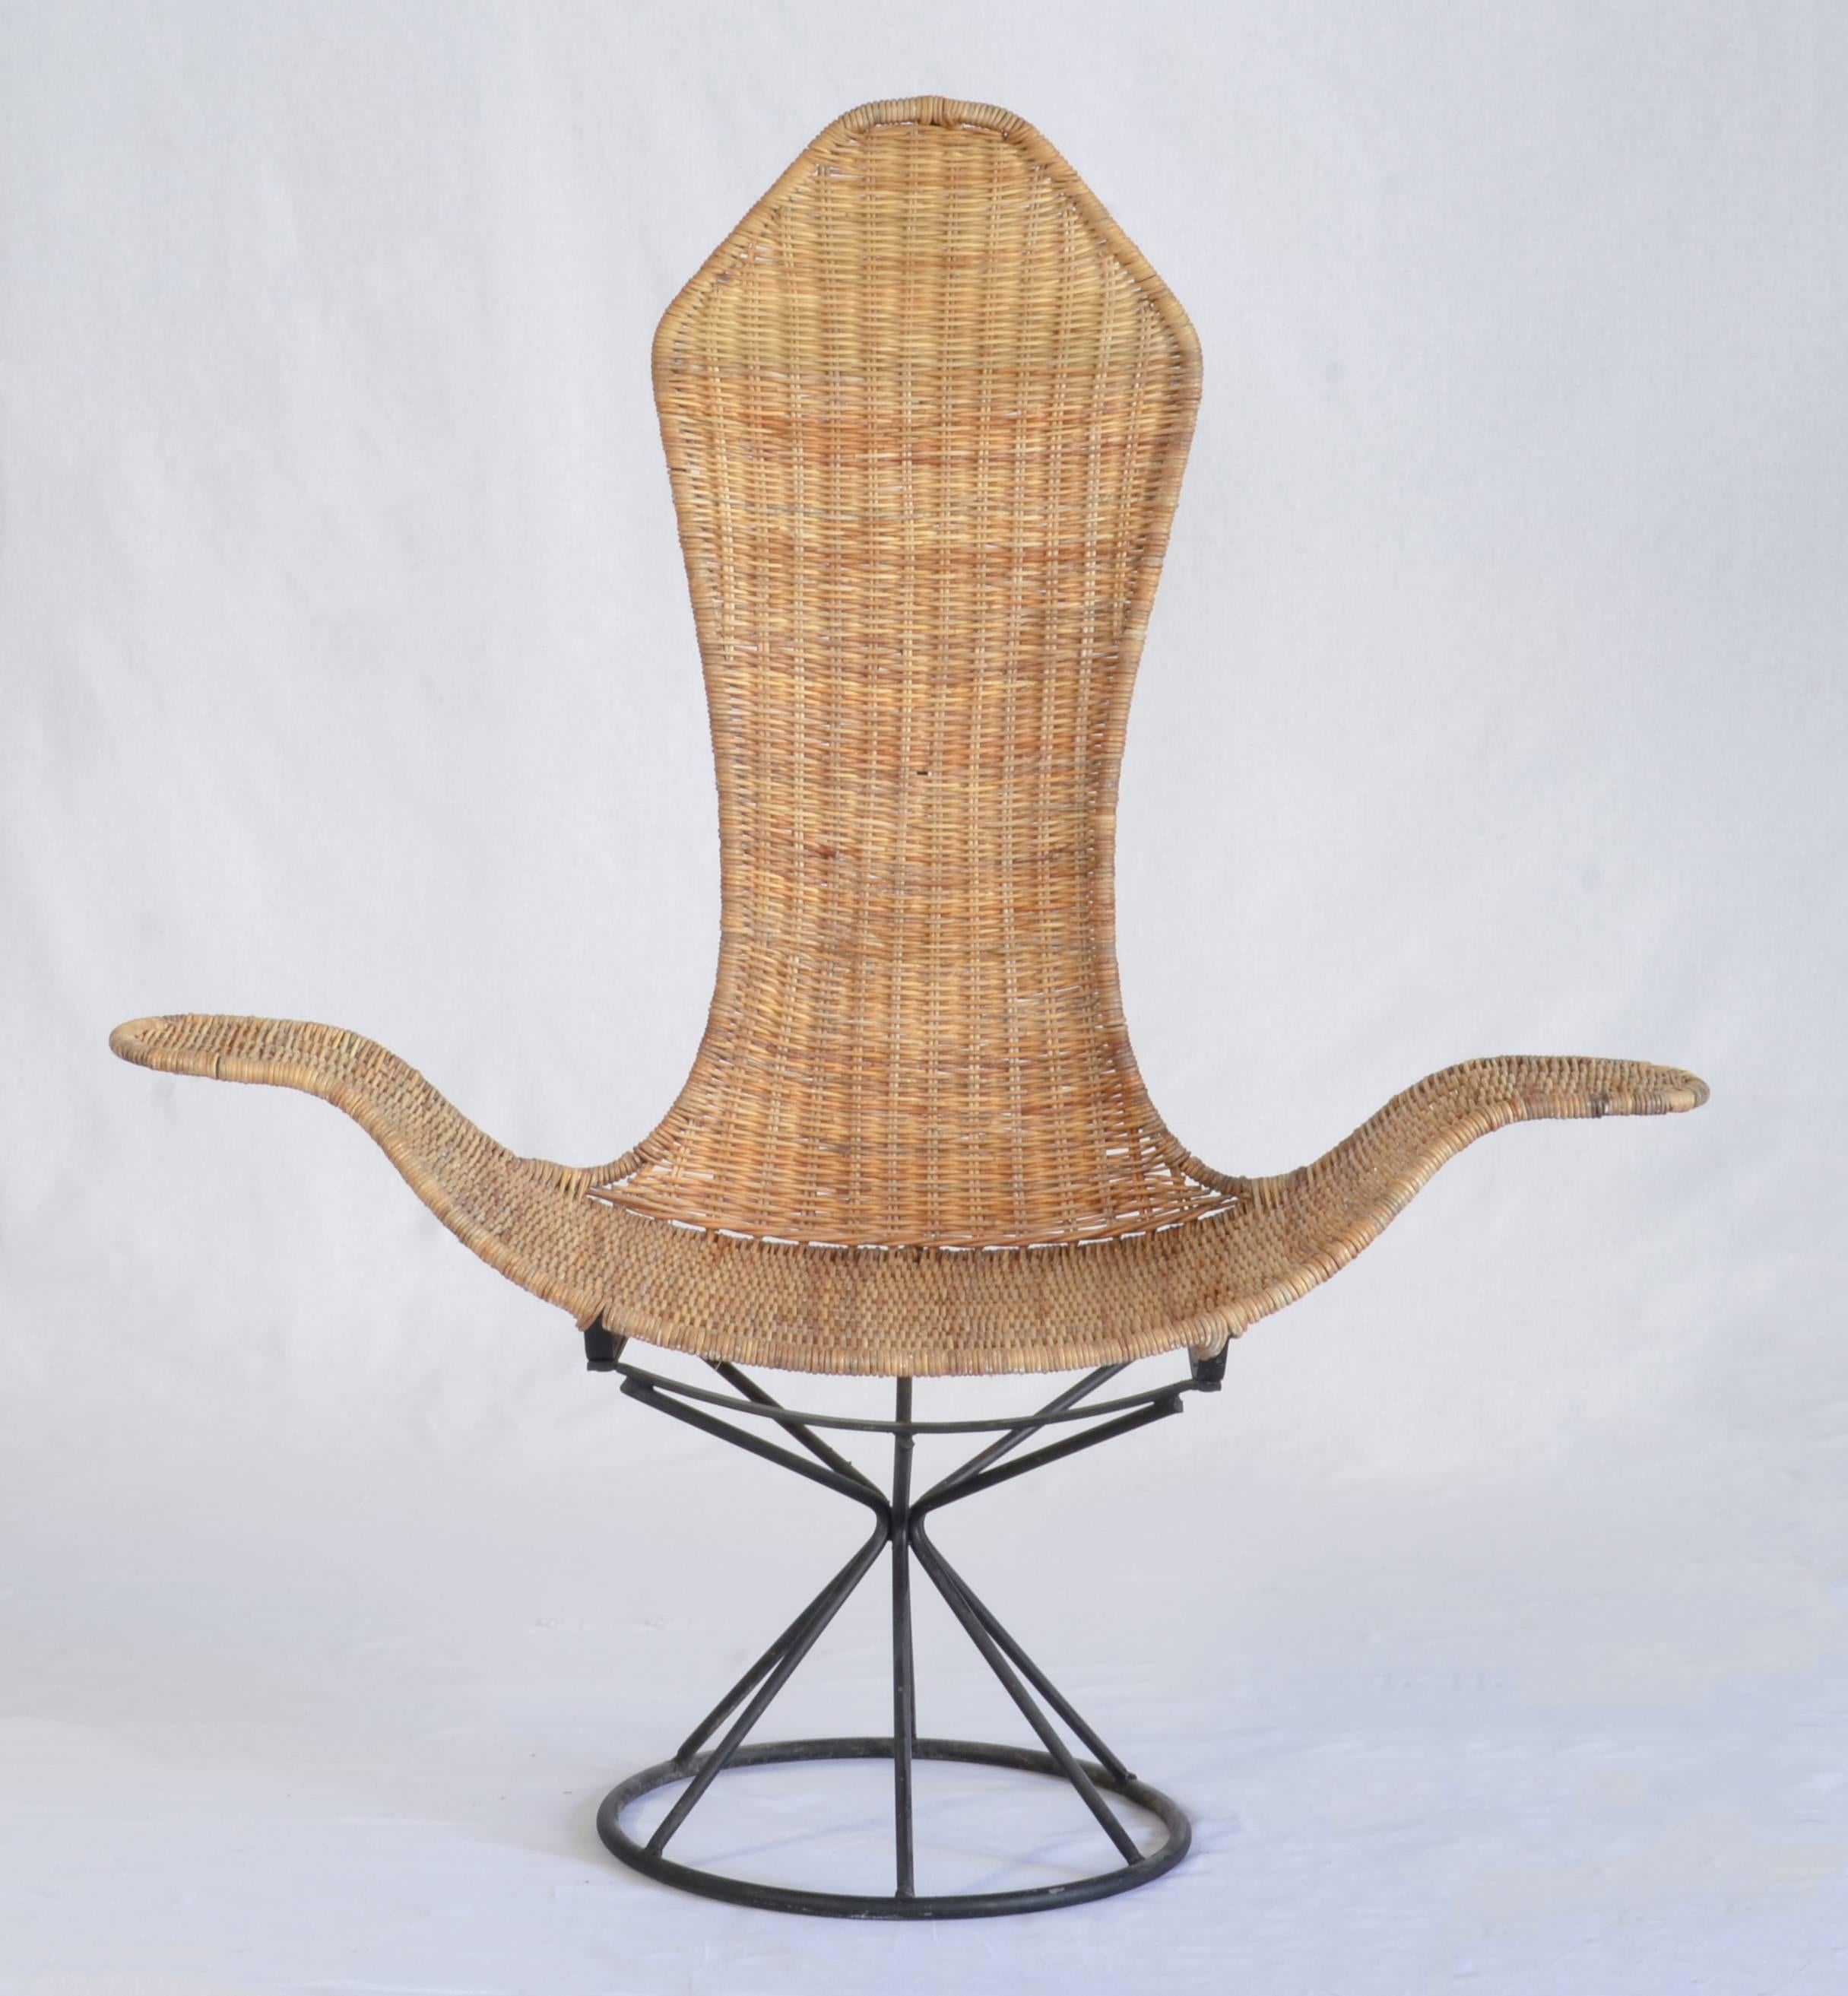 North American 1960s Wicker Wave Chair